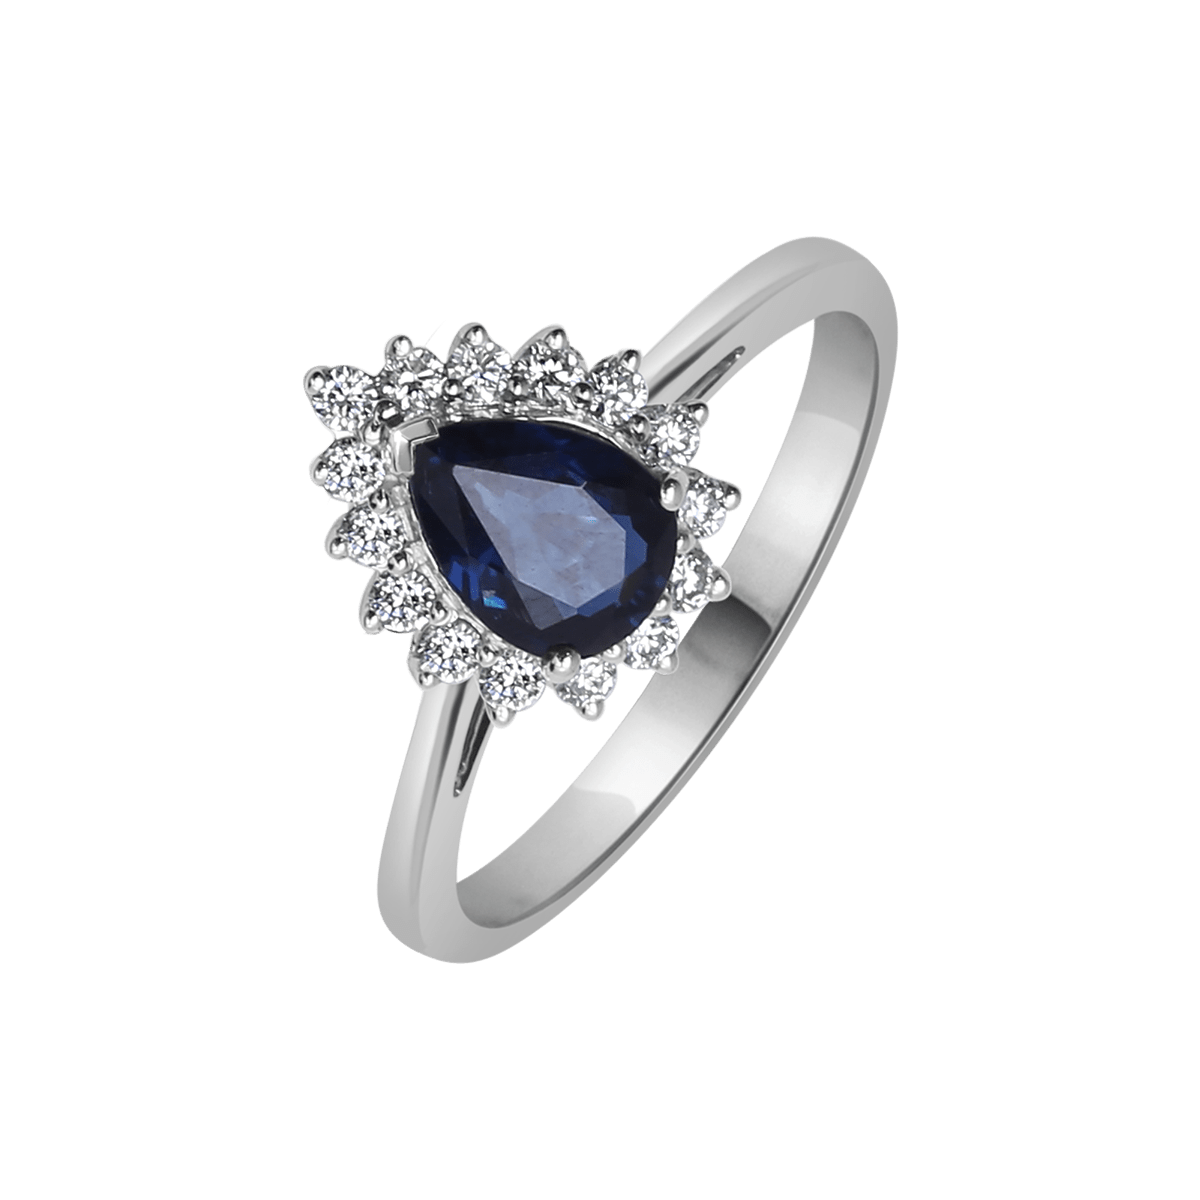 Pear Gemstone Diana Ring From Precious Collection